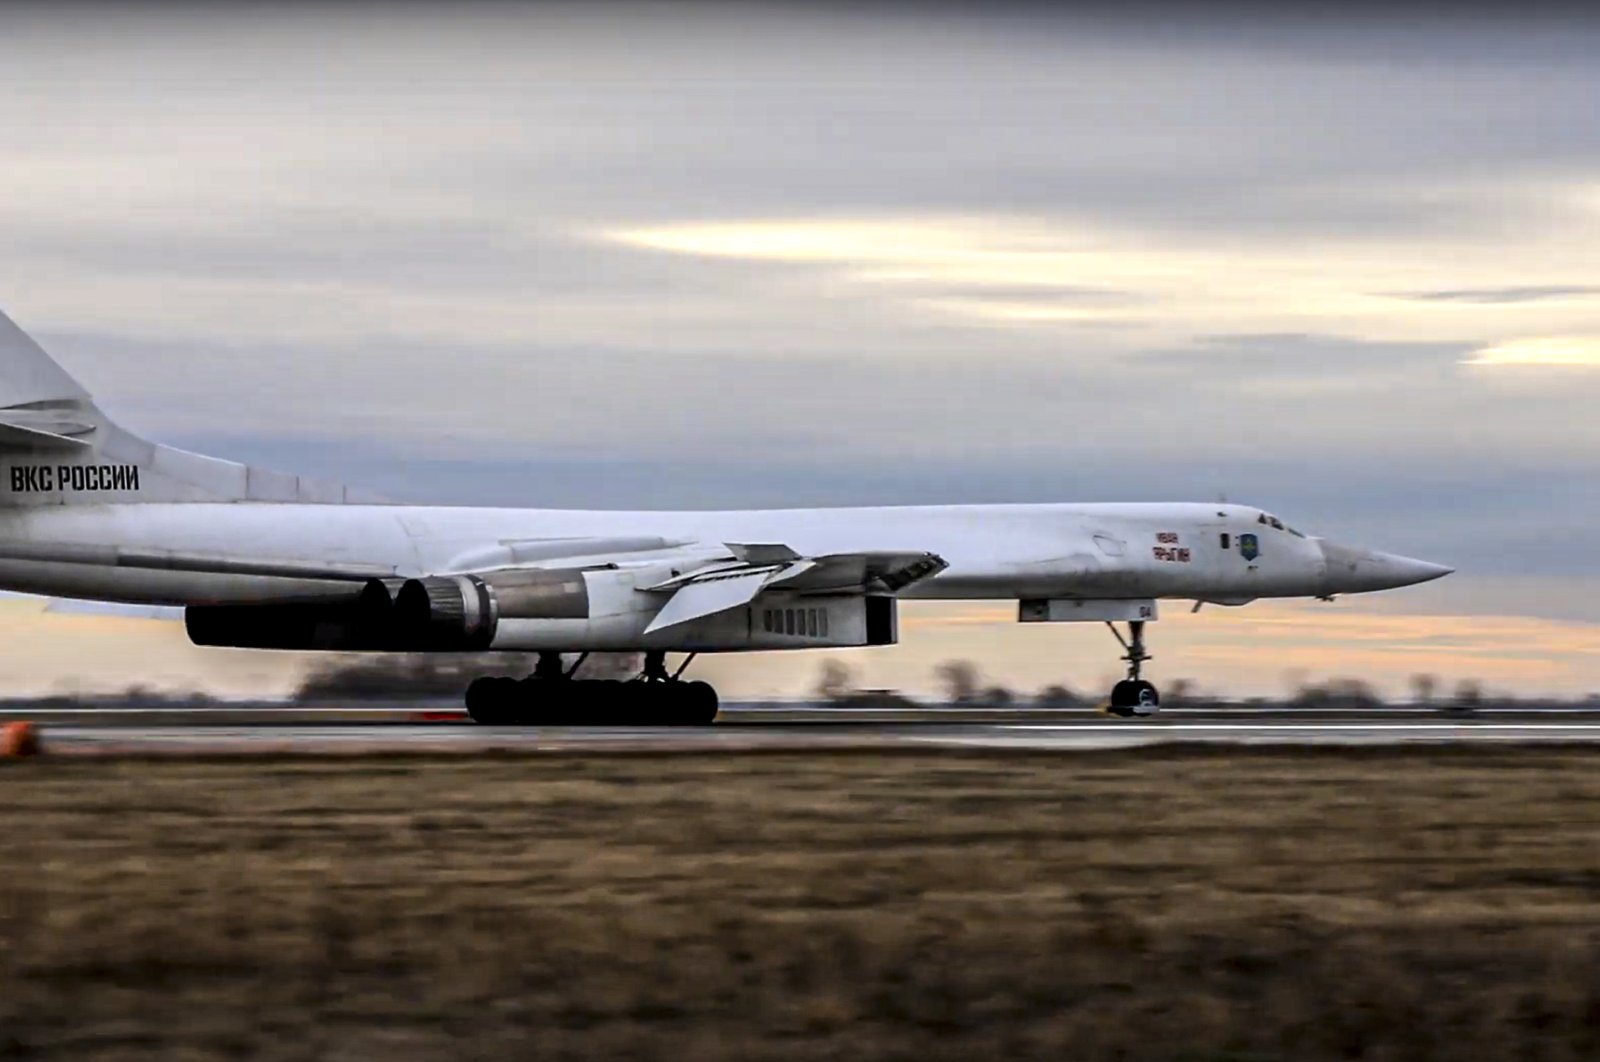 A Russian long-range Tu-160 bomber lands after patrolling in the airspace of Belarus at an airfield in Russia, Nov. 11, 2021. (AP Photo)